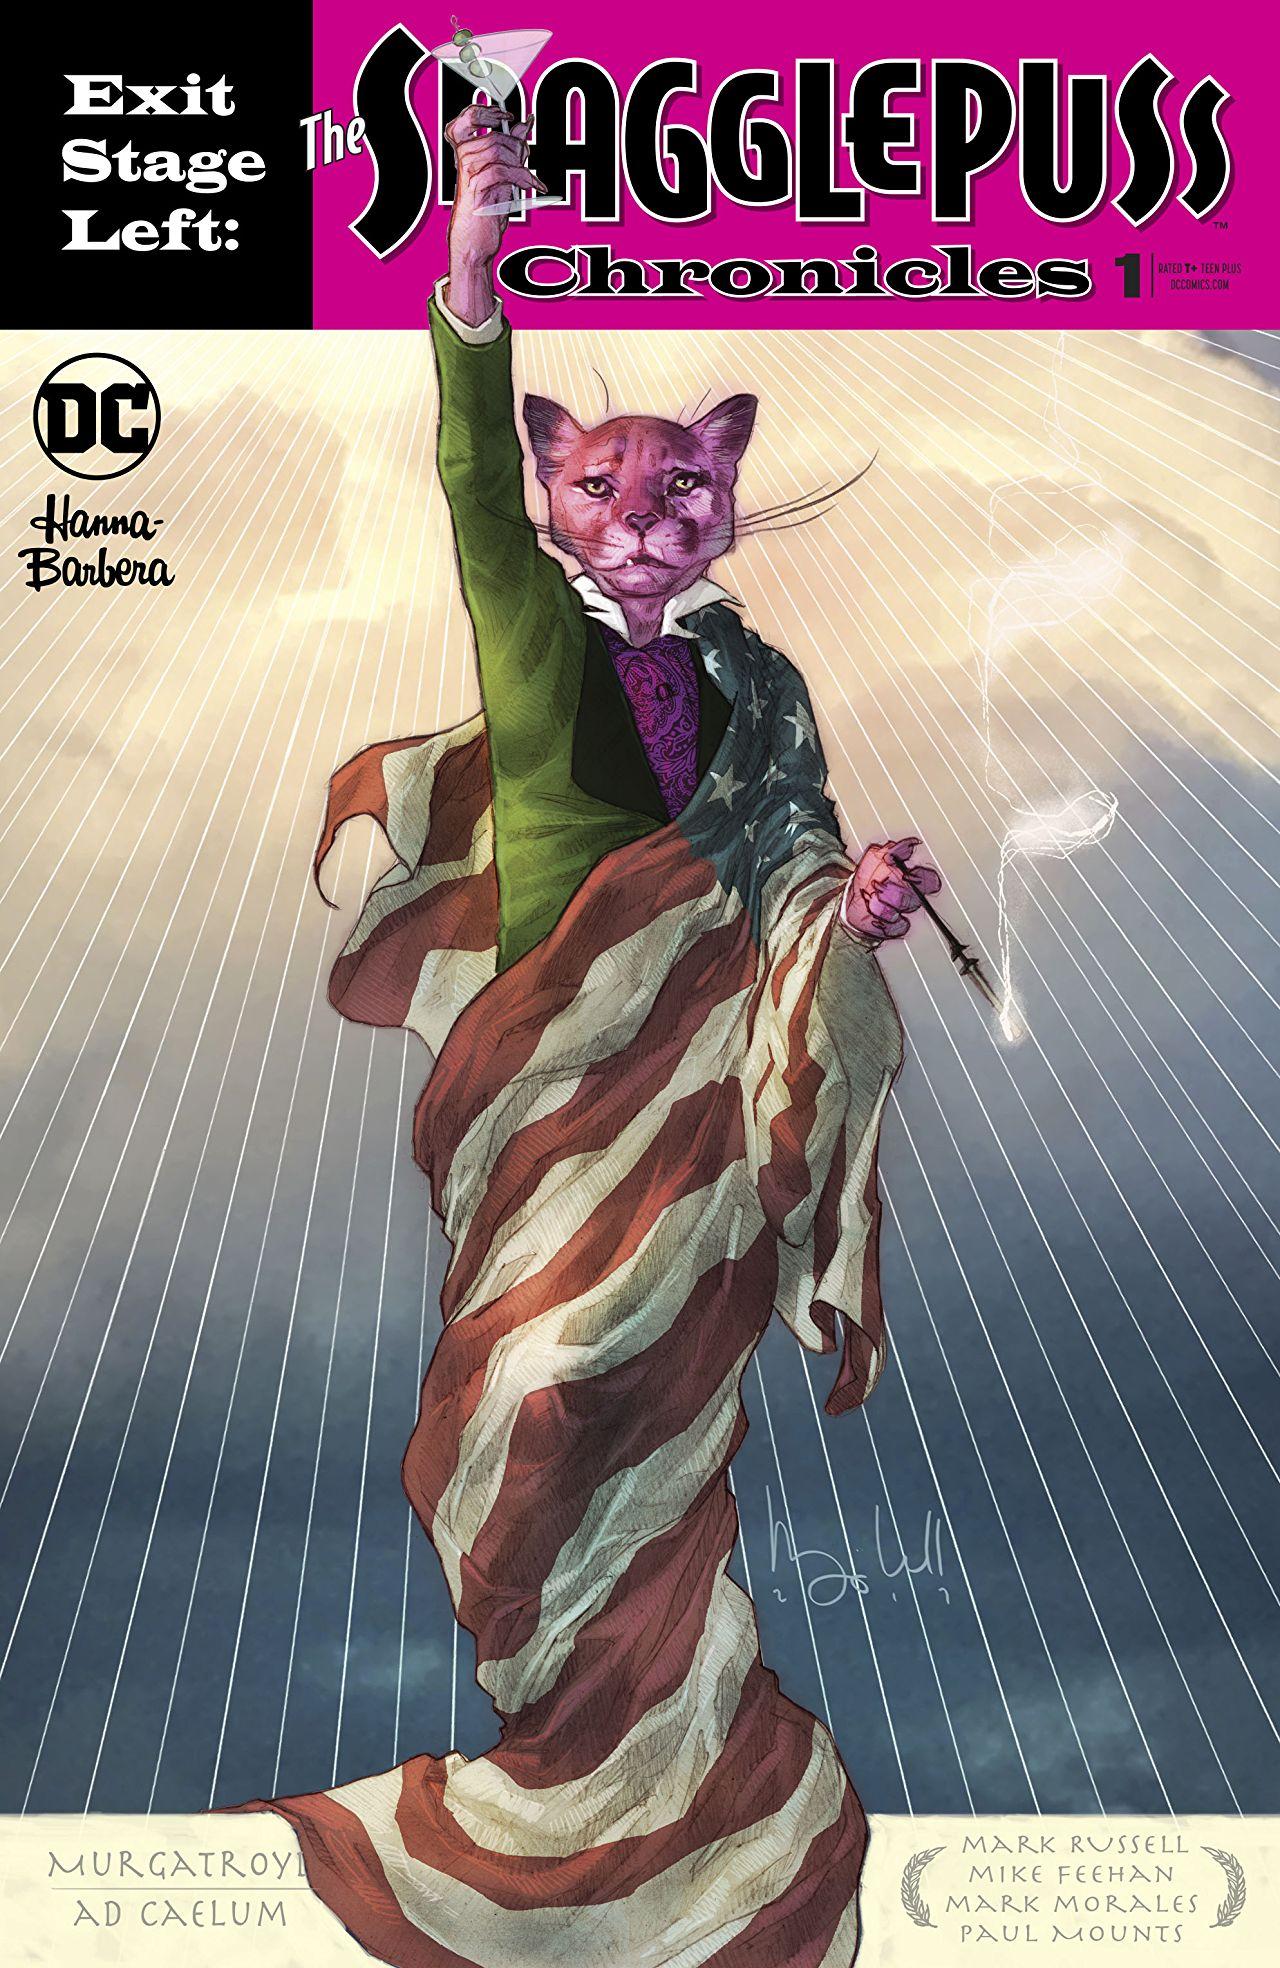 Exit Stage Left: The Snagglepuss Chronicles Vol. 1 #1